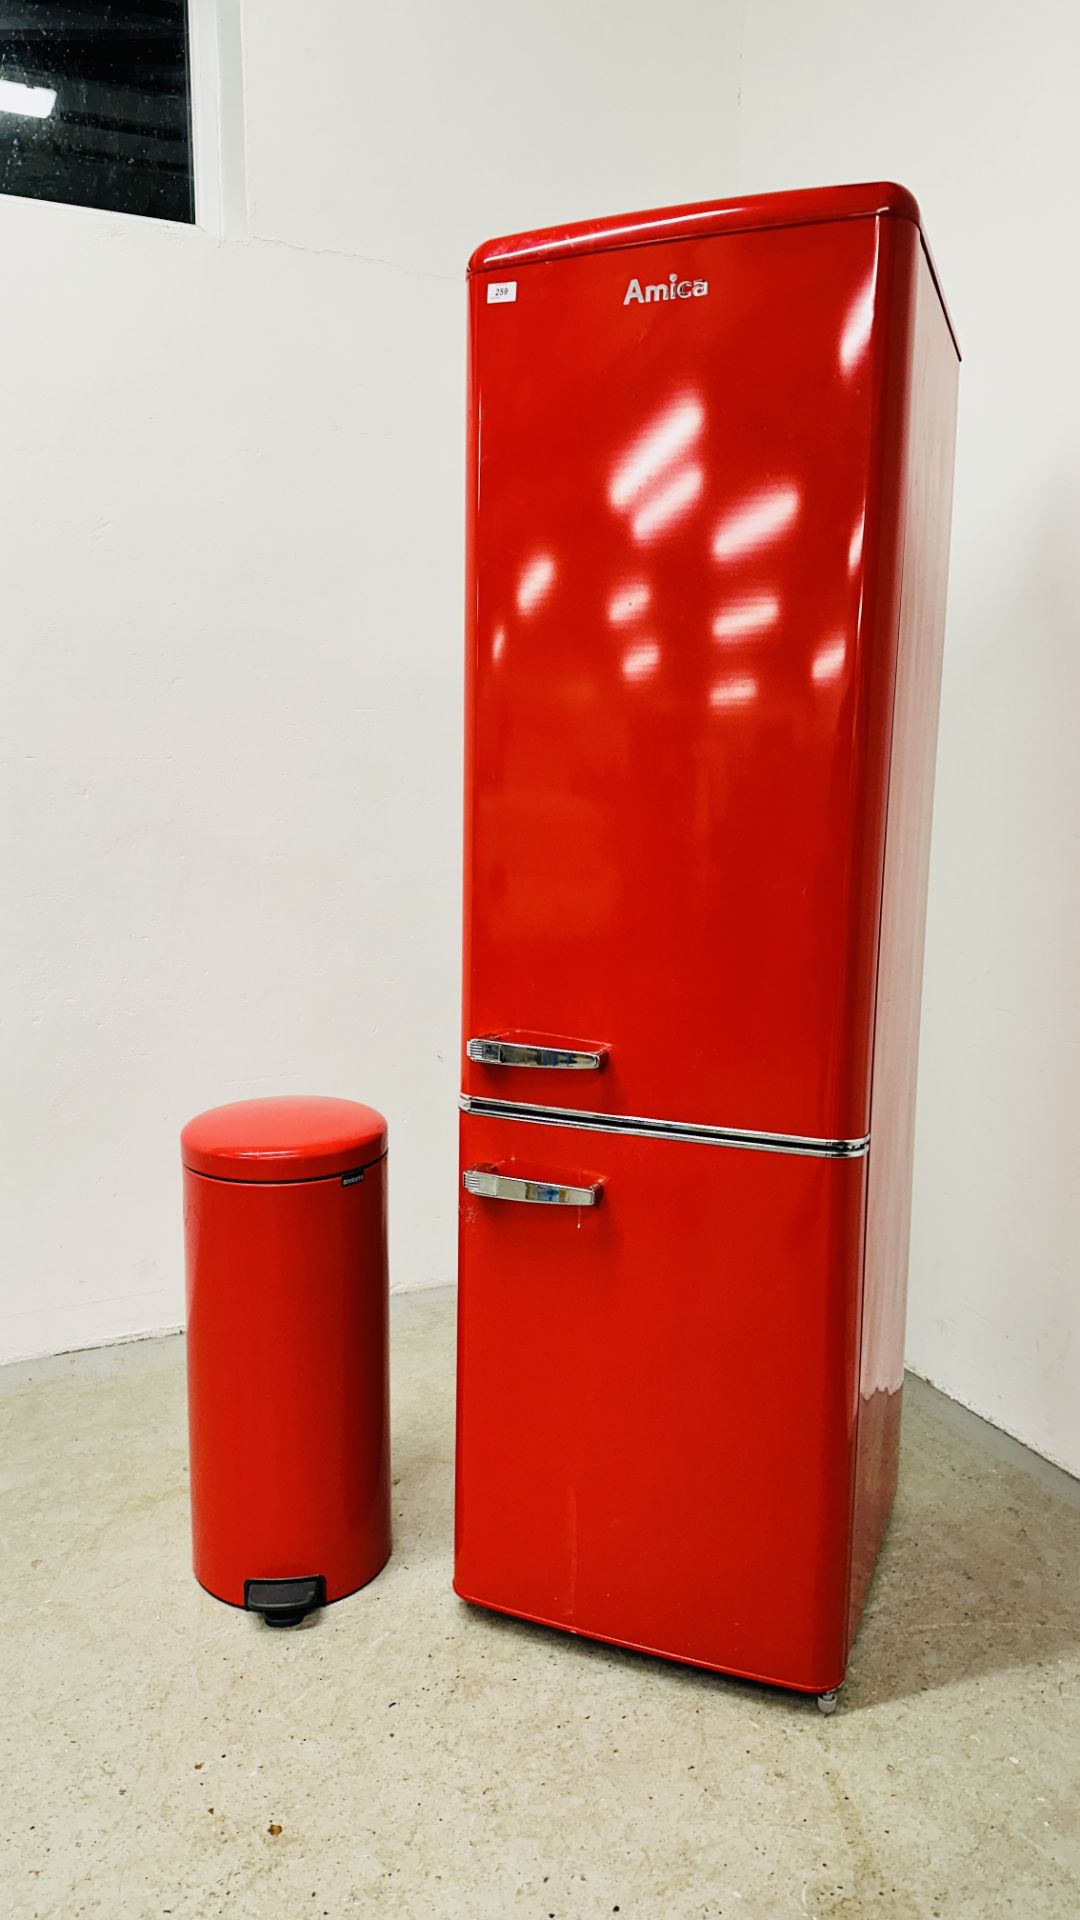 RETRO STYLE AMICA RED FINISH FRIDGE FREEZER + RED PEDAL BIN - SOLD AS SEEN. - Image 3 of 10